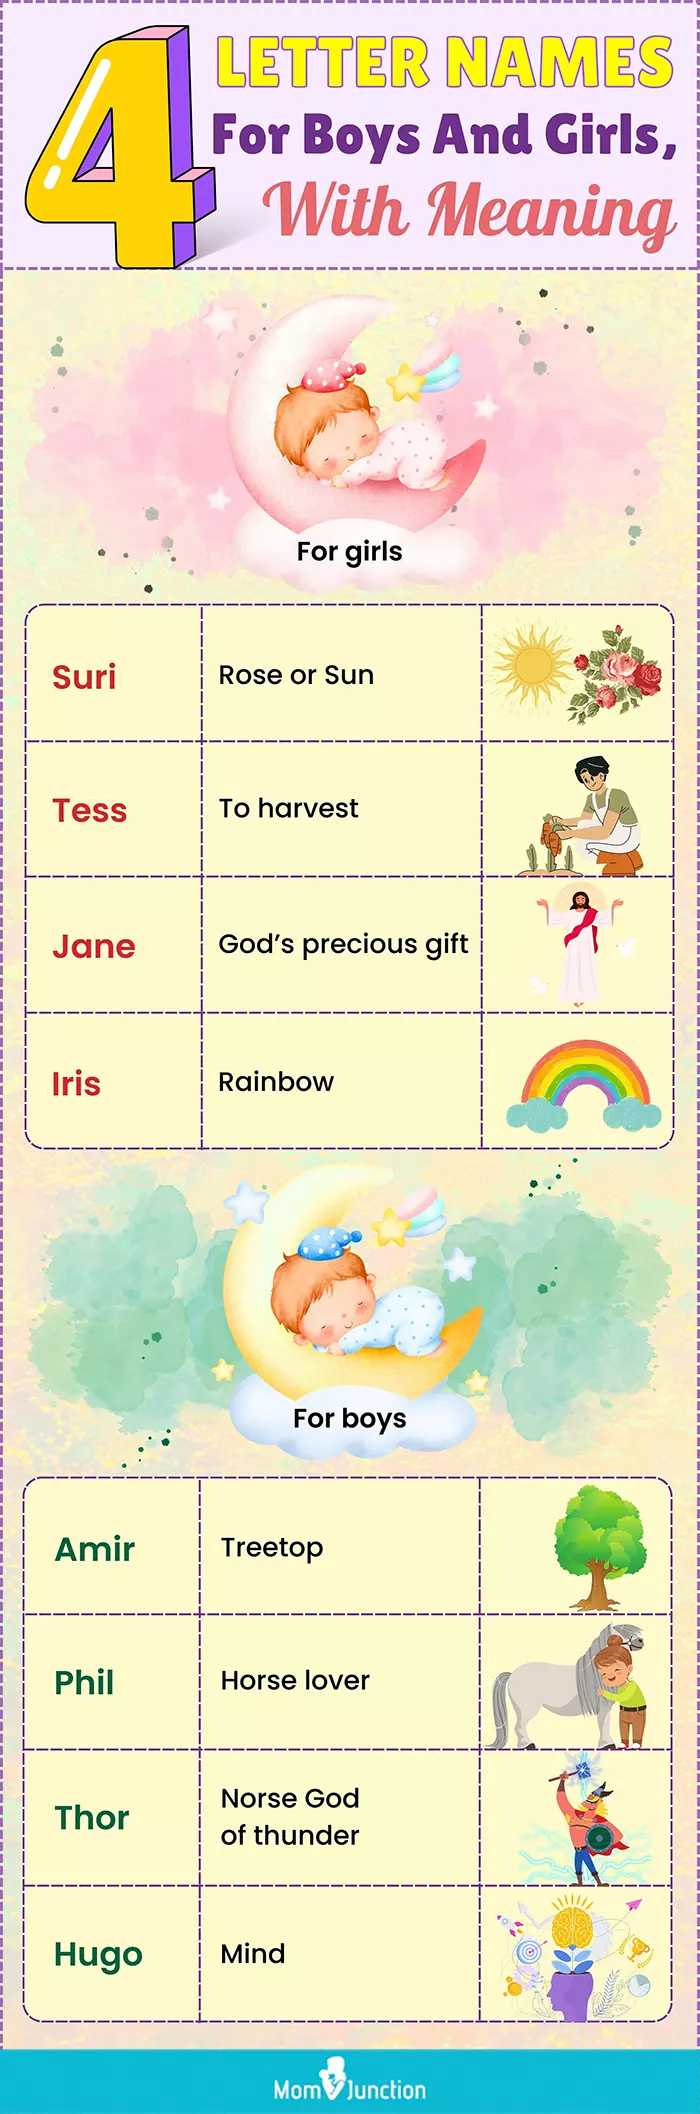 letter names for boys and girls with meaning (infographic)